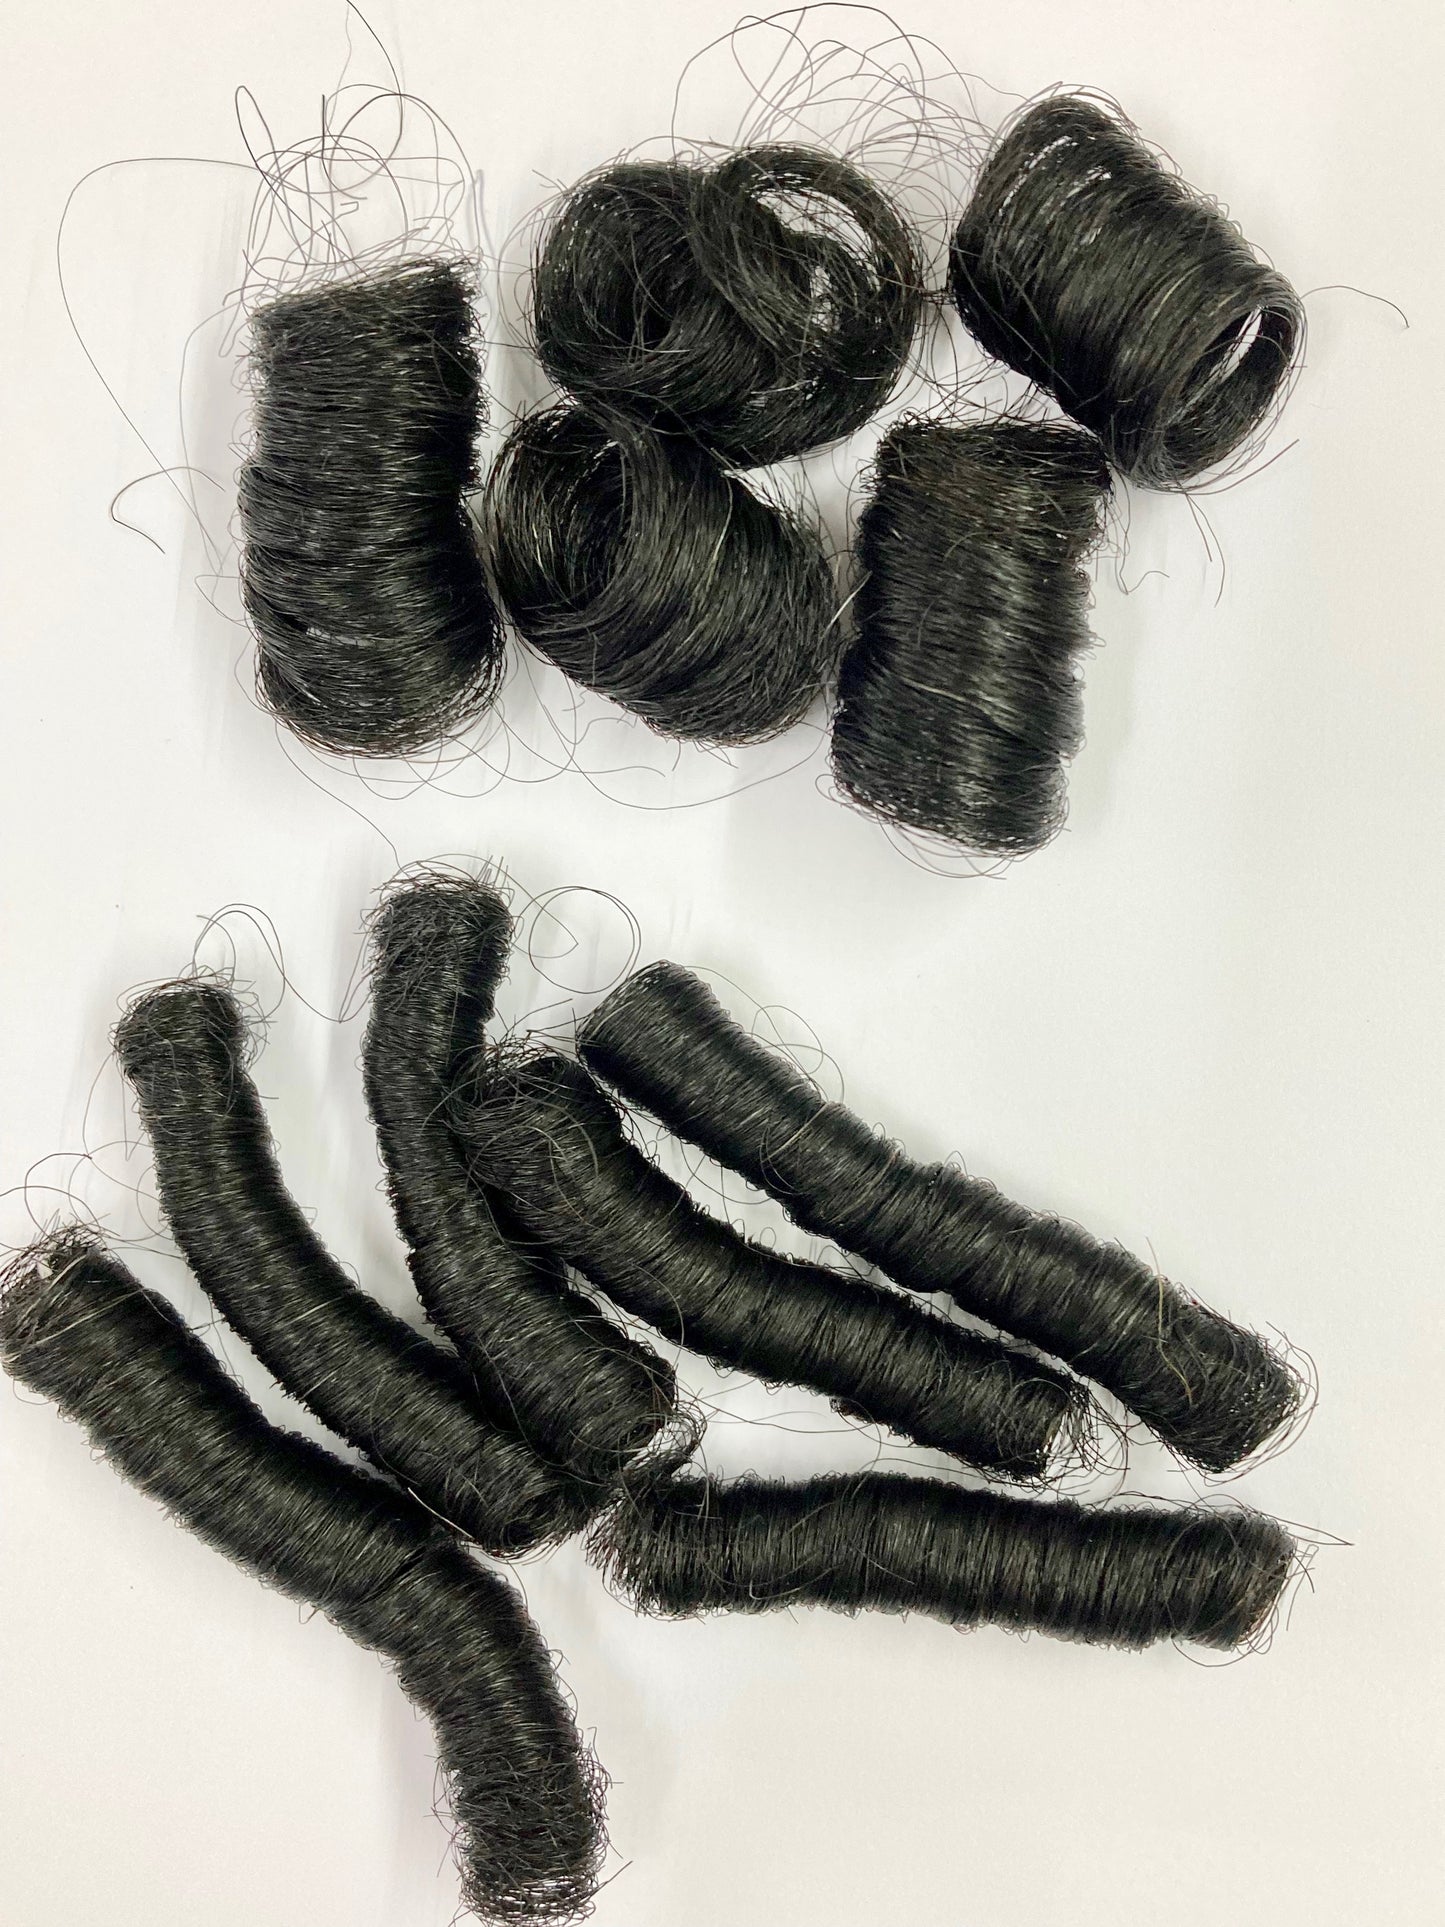 874 Natural Black Permanent Curl Yak - Various Curl Sizes and Hair Lengths